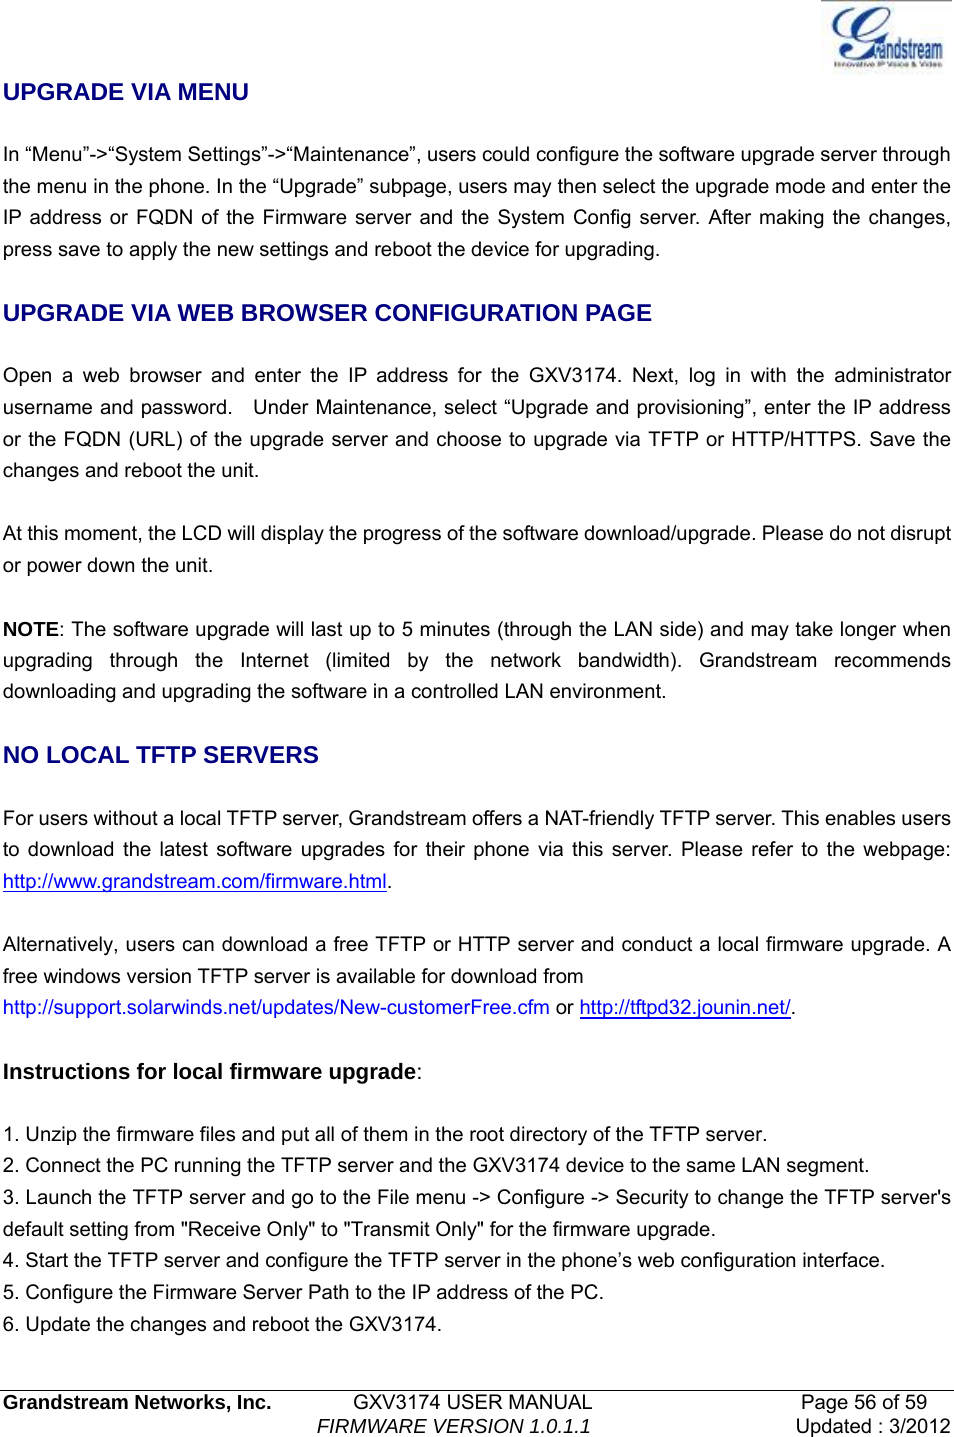   Grandstream Networks, Inc.        GXV3174 USER MANUAL                     Page 56 of 59                                FIRMWARE VERSION 1.0.1.1  Updated : 3/2012  UPGRADE VIA MENU  In “Menu”-&gt;“System Settings”-&gt;“Maintenance”, users could configure the software upgrade server through the menu in the phone. In the “Upgrade” subpage, users may then select the upgrade mode and enter the IP address or FQDN of the Firmware server and the System Config server. After making the changes, press save to apply the new settings and reboot the device for upgrading.  UPGRADE VIA WEB BROWSER CONFIGURATION PAGE  Open a web browser and enter the IP address for the GXV3174. Next, log in with the administrator username and password.    Under Maintenance, select “Upgrade and provisioning”, enter the IP address or the FQDN (URL) of the upgrade server and choose to upgrade via TFTP or HTTP/HTTPS. Save the changes and reboot the unit.  At this moment, the LCD will display the progress of the software download/upgrade. Please do not disrupt or power down the unit.  NOTE: The software upgrade will last up to 5 minutes (through the LAN side) and may take longer when upgrading through the Internet (limited by the network bandwidth). Grandstream recommends downloading and upgrading the software in a controlled LAN environment.    NO LOCAL TFTP SERVERS  For users without a local TFTP server, Grandstream offers a NAT-friendly TFTP server. This enables users to download the latest software upgrades for their phone via this server. Please refer to the webpage: http://www.grandstream.com/firmware.html.  Alternatively, users can download a free TFTP or HTTP server and conduct a local firmware upgrade. A free windows version TFTP server is available for download from   http://support.solarwinds.net/updates/New-customerFree.cfm or http://tftpd32.jounin.net/.   Instructions for local firmware upgrade:  1. Unzip the firmware files and put all of them in the root directory of the TFTP server. 2. Connect the PC running the TFTP server and the GXV3174 device to the same LAN segment. 3. Launch the TFTP server and go to the File menu -&gt; Configure -&gt; Security to change the TFTP server&apos;s default setting from &quot;Receive Only&quot; to &quot;Transmit Only&quot; for the firmware upgrade. 4. Start the TFTP server and configure the TFTP server in the phone’s web configuration interface. 5. Configure the Firmware Server Path to the IP address of the PC. 6. Update the changes and reboot the GXV3174. 